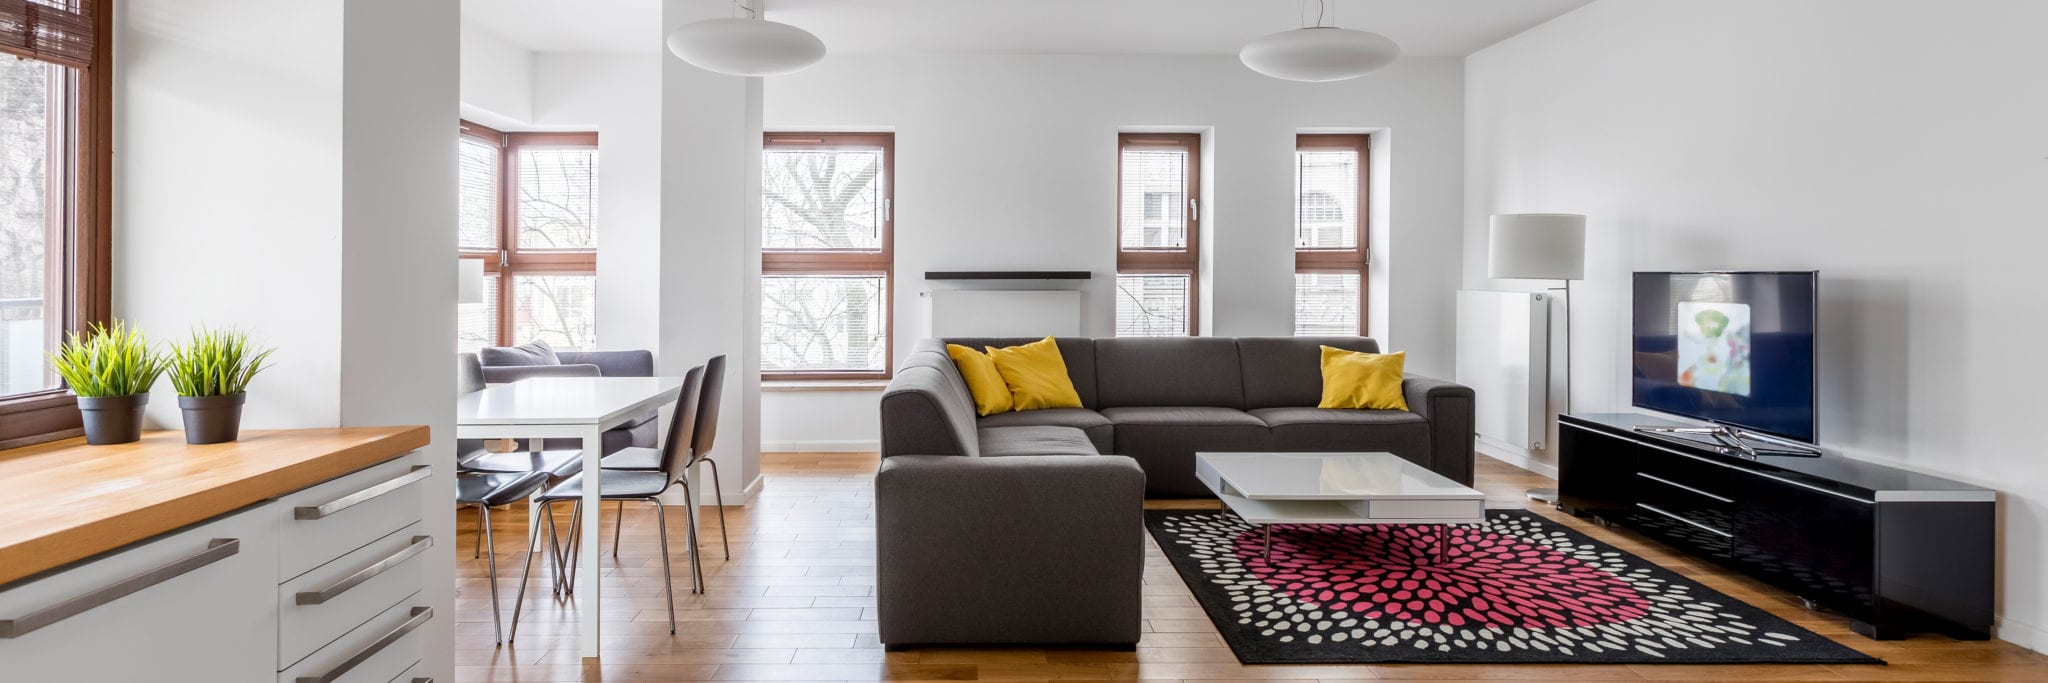 5 Downsizing Tips for Small Apartment Life